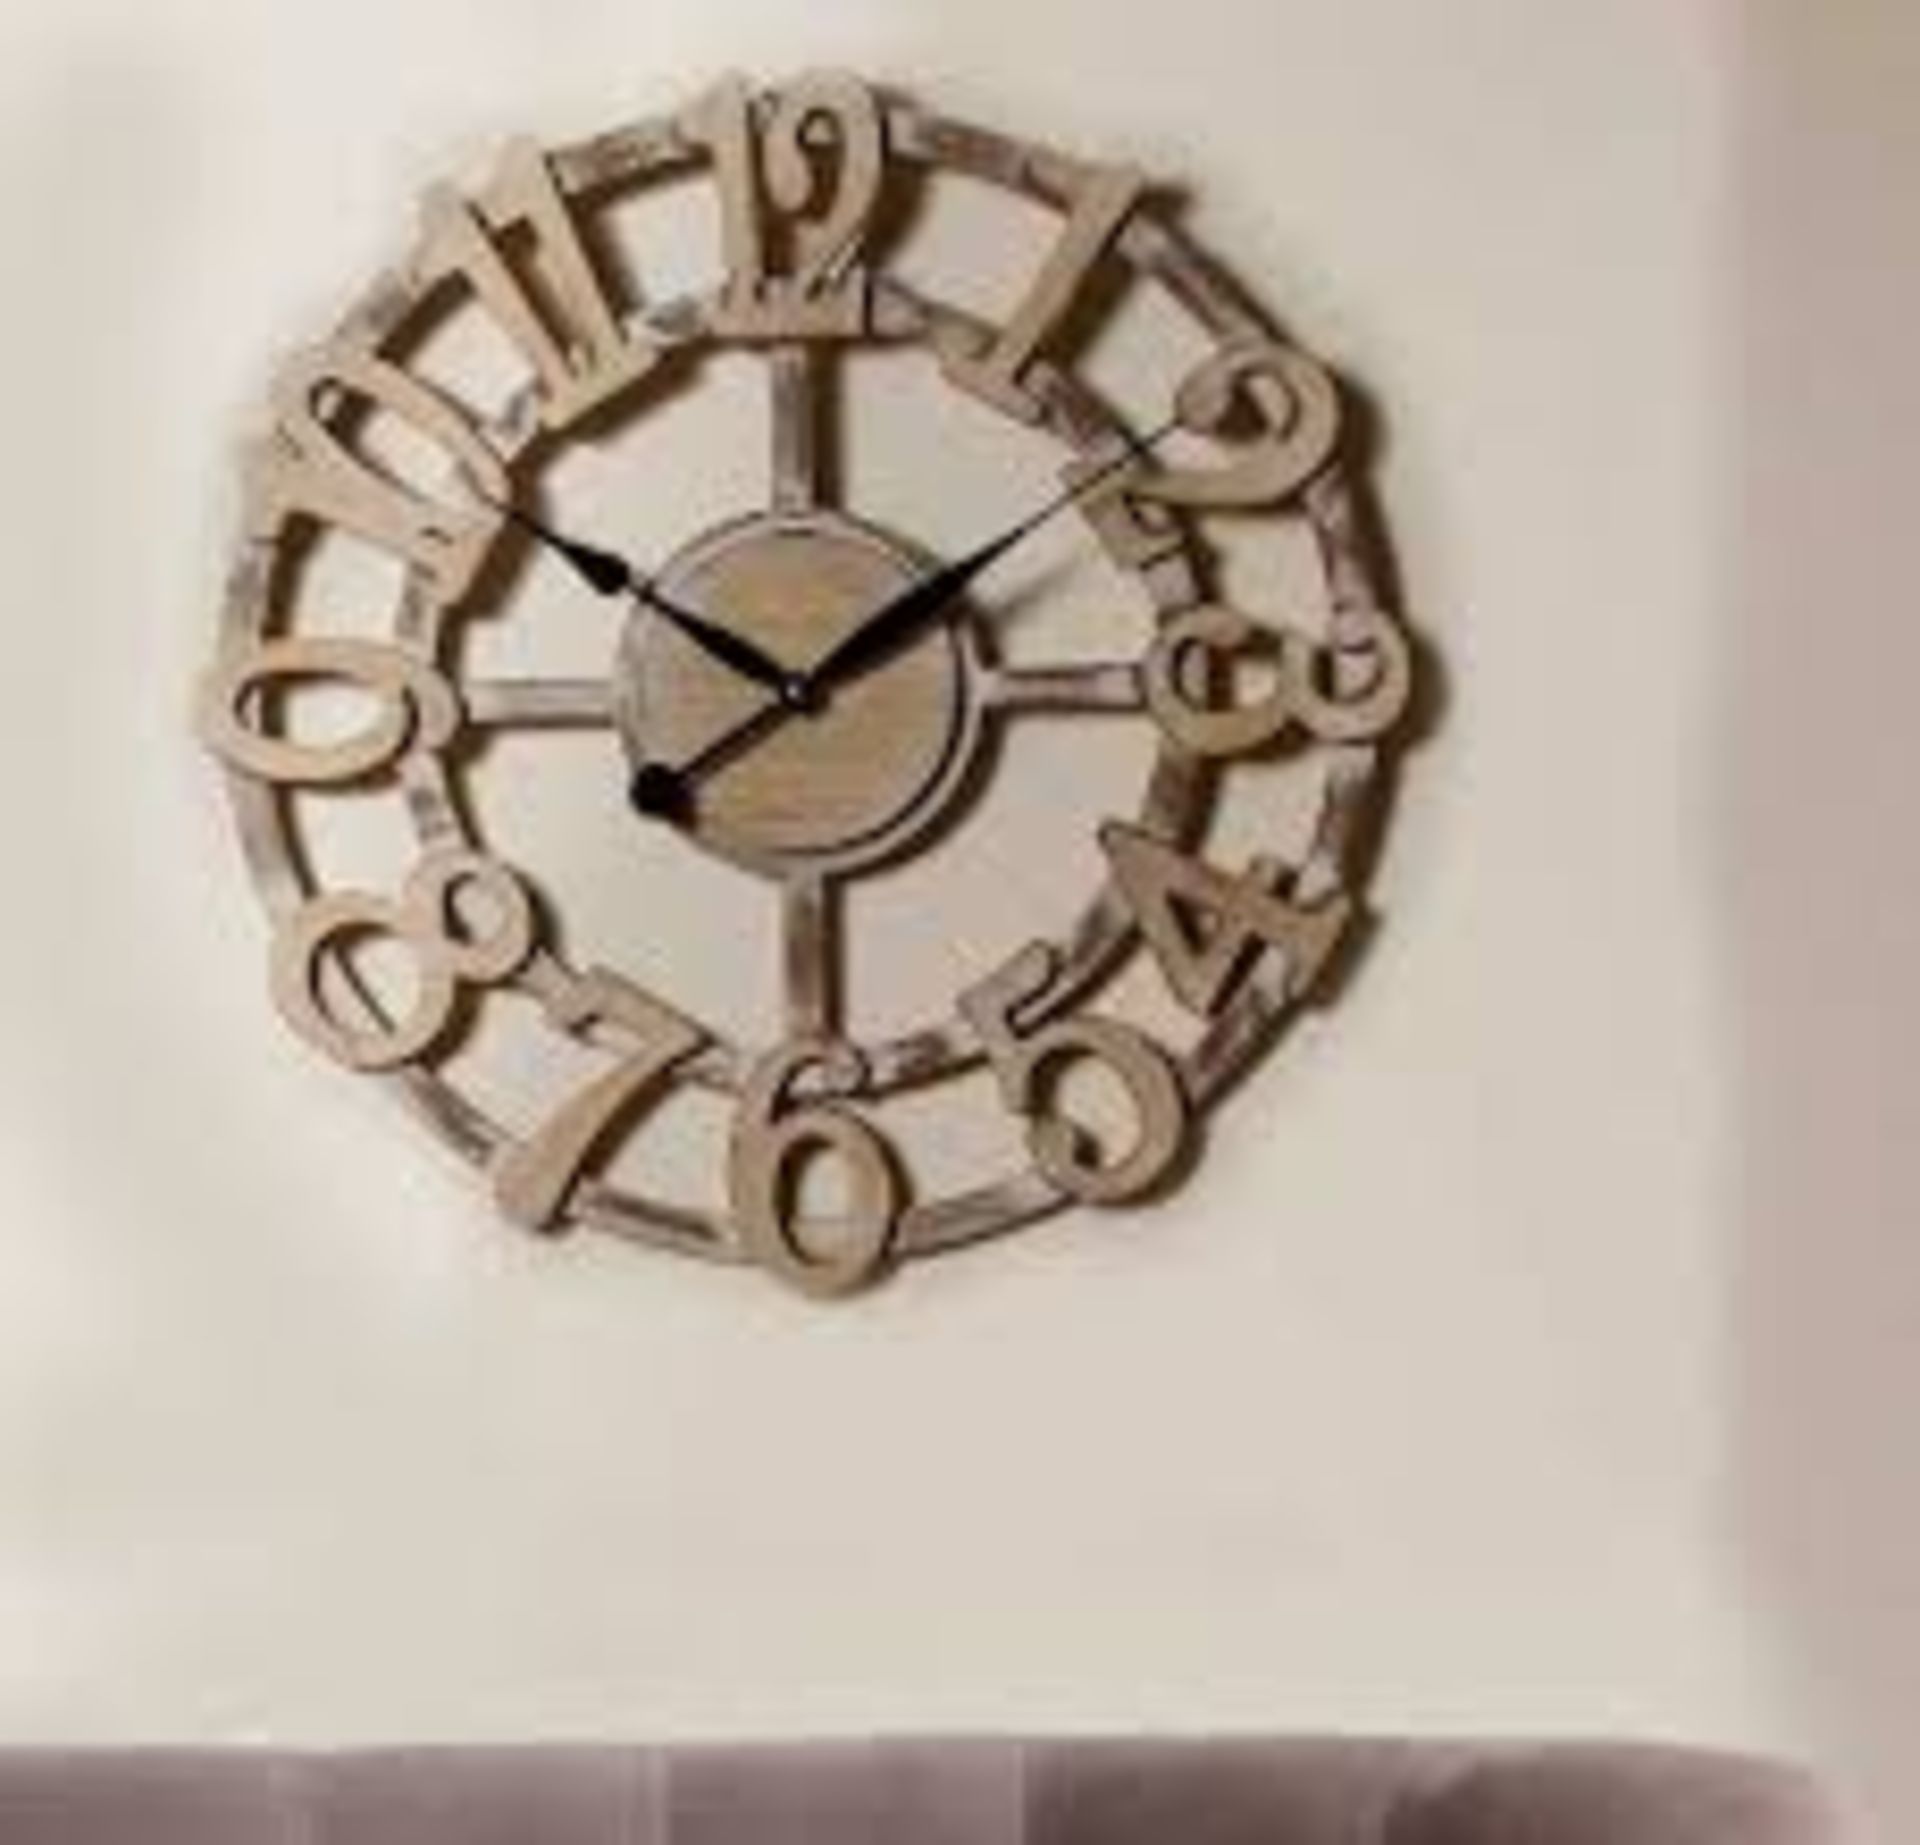 Assorted Wooden And Metal Designer Wall Clocks By Pacific Home And Wanduhraus RRP £50-60 Each (